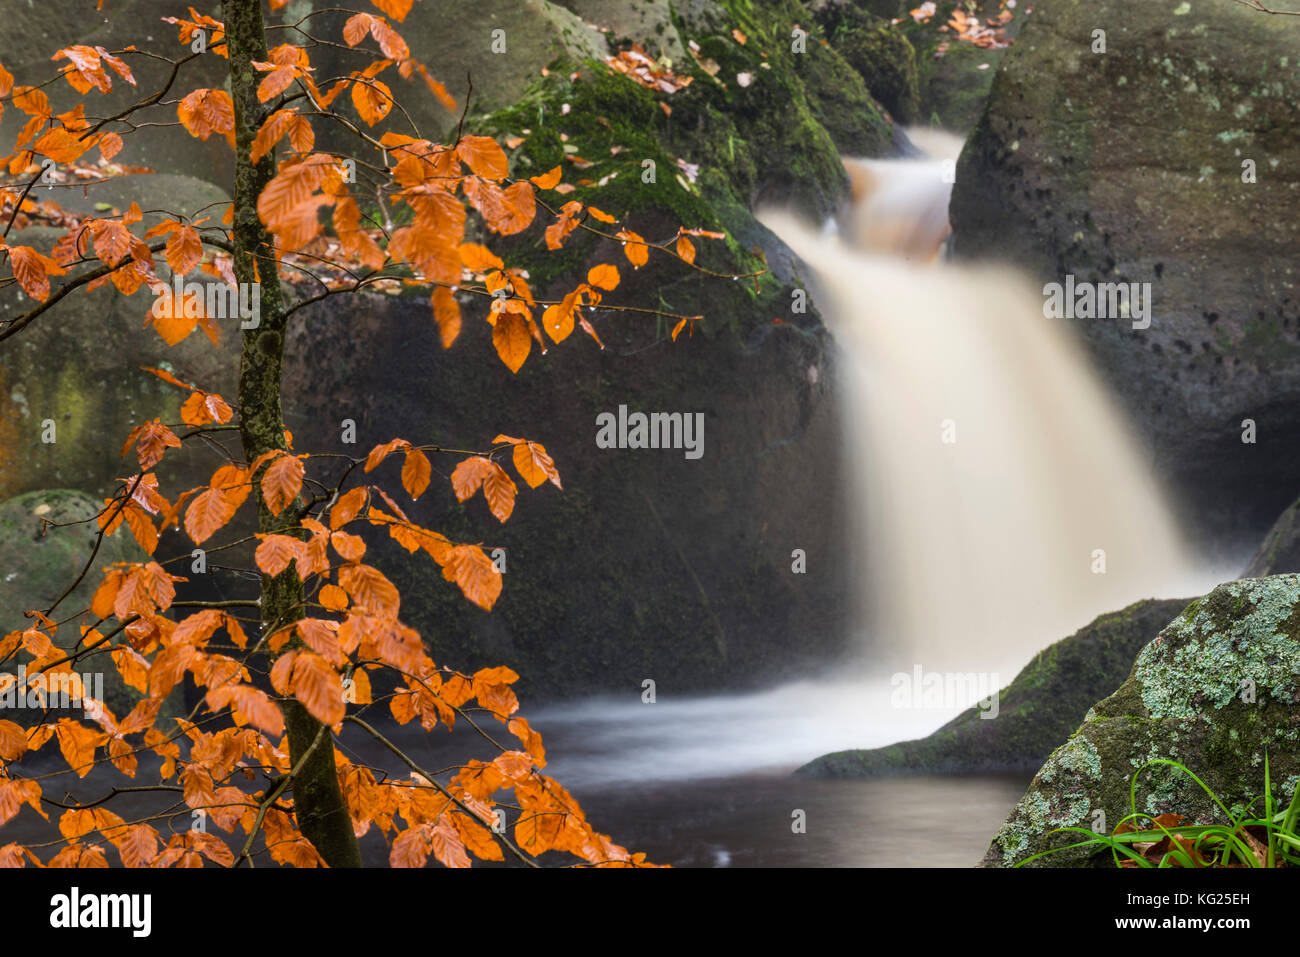 Common beech (Fagus sylvatica) tree and waterfall, Padley Gorge, Peak District, Derbyshire, England, United Kingdom, Europe Stock Photo